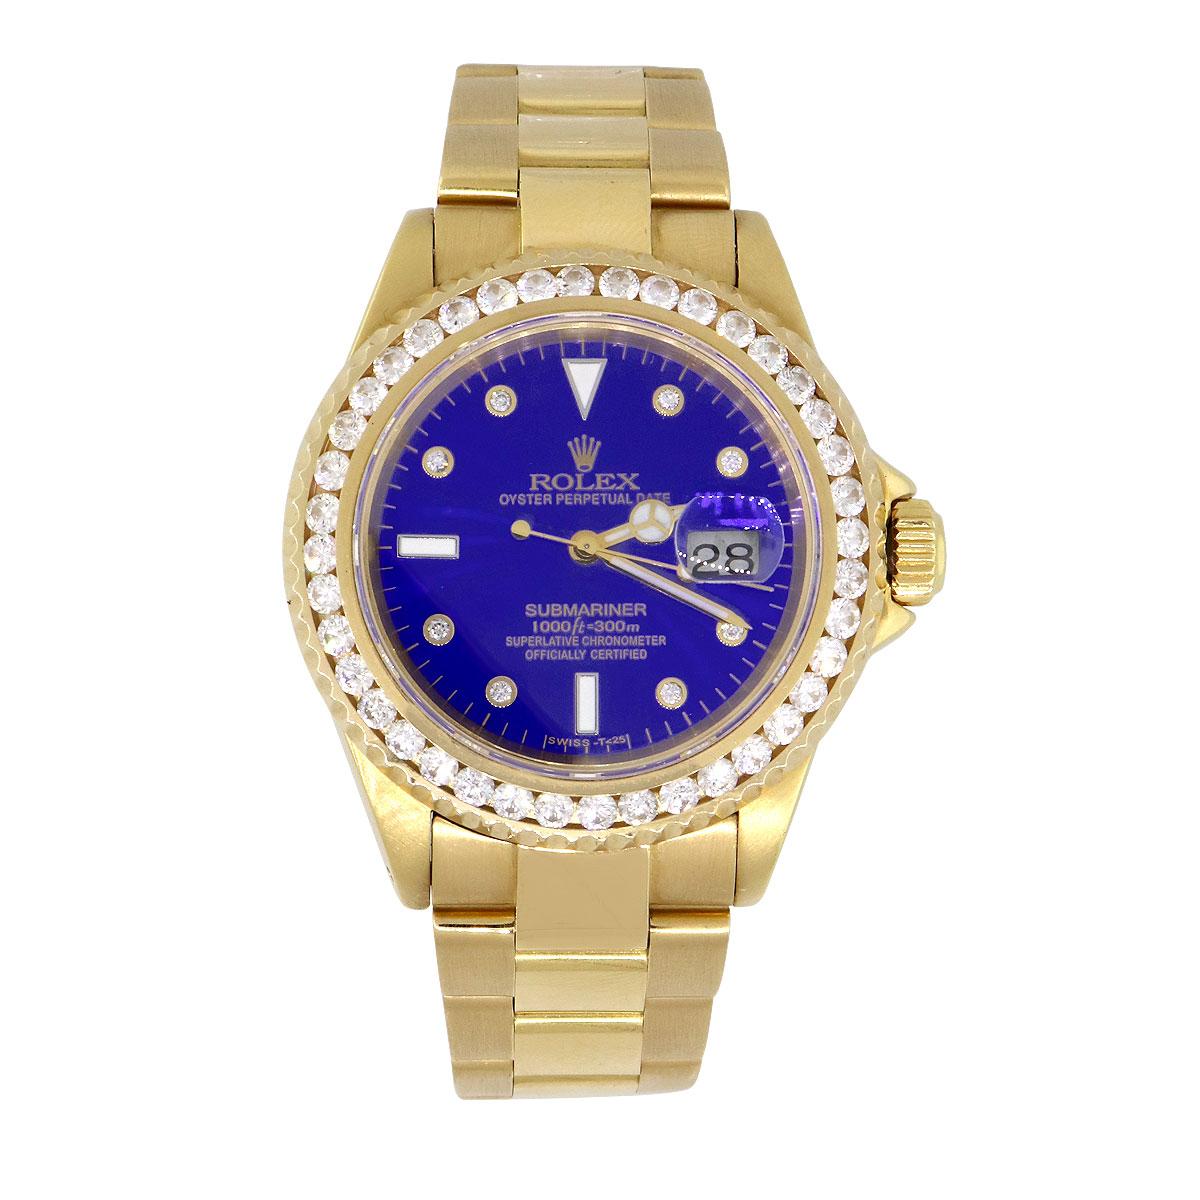 Brand: Rolex
MPN: 16618
Model: Submariner
Case Material: 18k yellow gold
Case Diameter: 40mm
Crystal: Scratch resistant sapphire
Bezel: Diamond bezel (aftermarket)
Dial: Blue dial (aftermarket)
Bracelet: 18k yellow gold oyster band
Size: Will fit up